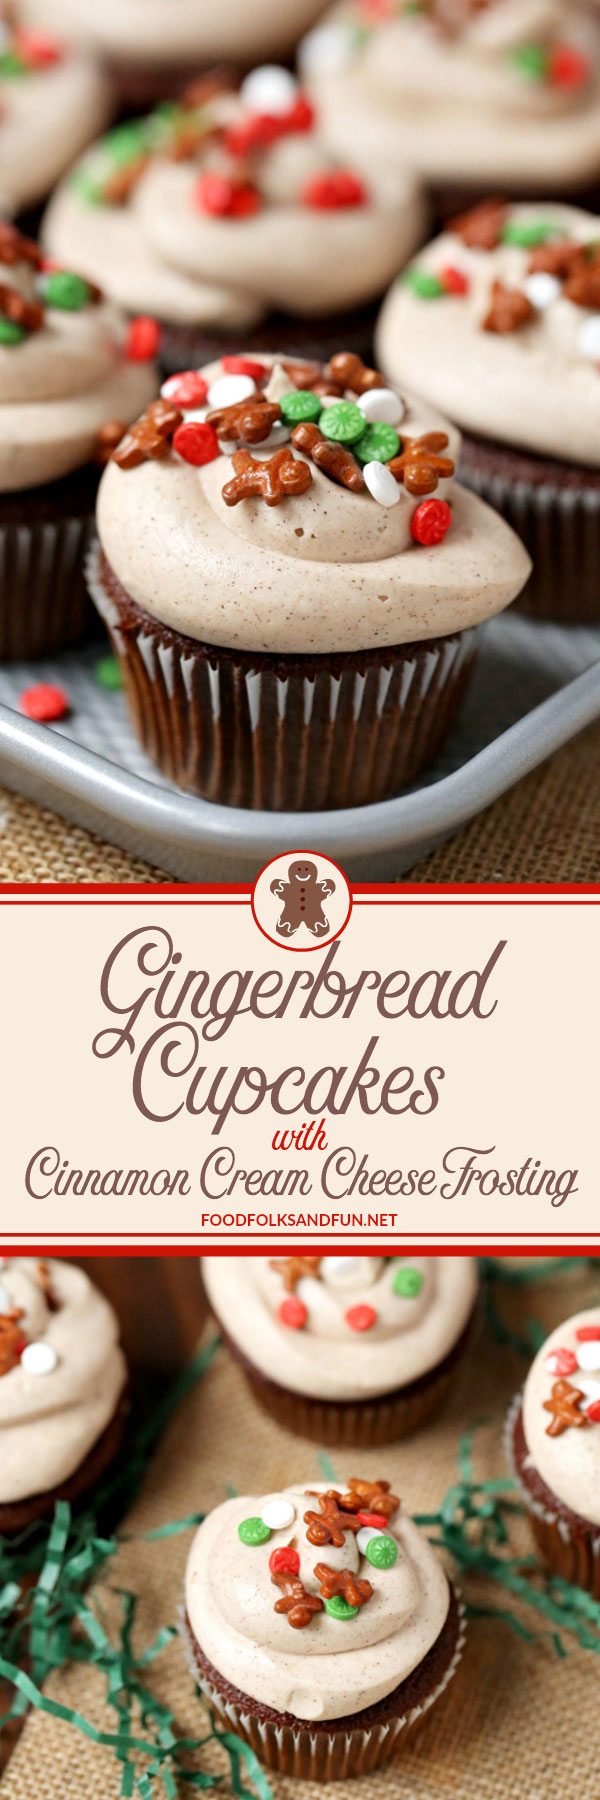 Spicy, delicious Gingerbread Cupcakes with Cinnamon Cream Cheese Frosting.